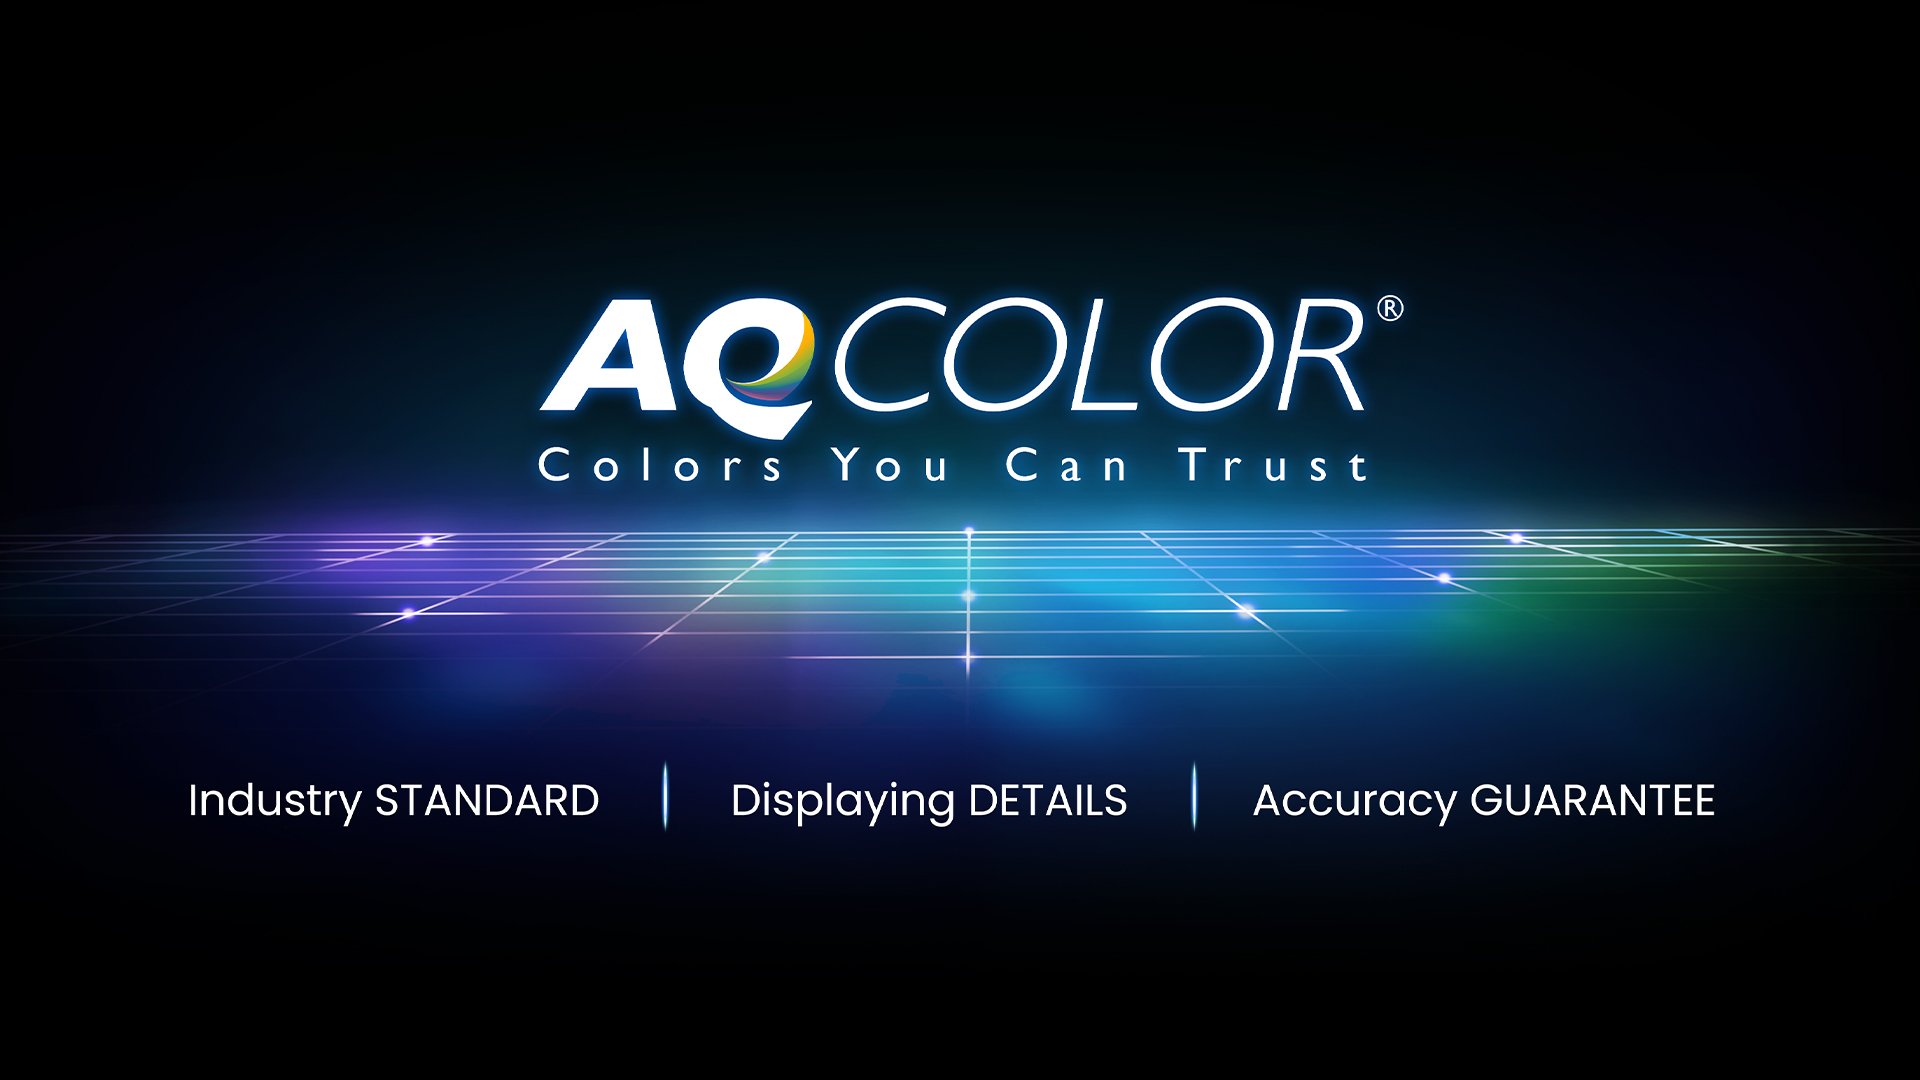 BenQ AQCOLOR technology delivers Accurate Reproduction. This translates to the display of colour precisely as it is intended to appear. Led by a color expert, the BenQ team took part in the ICC and ISO to establish colour-related standards and implementation guidelines.